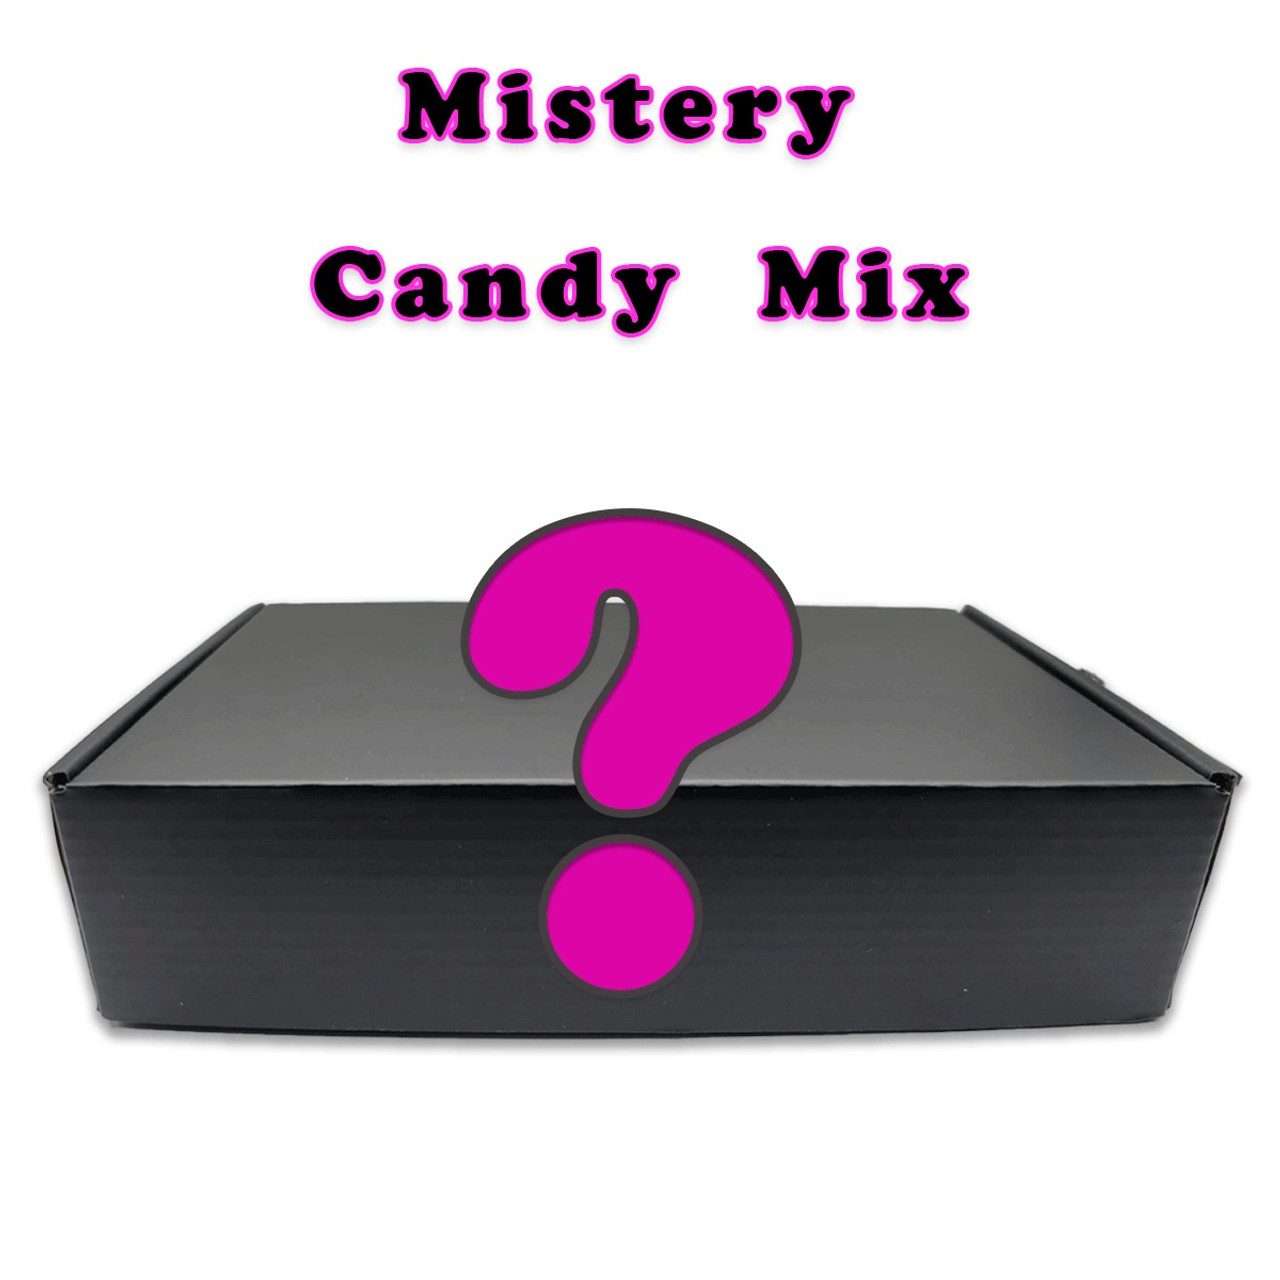 The newest addition to My Mexican Candy brings a sweet, sour, salty or spicy mystery inside. This box contains forty one pieces of mexican candies.